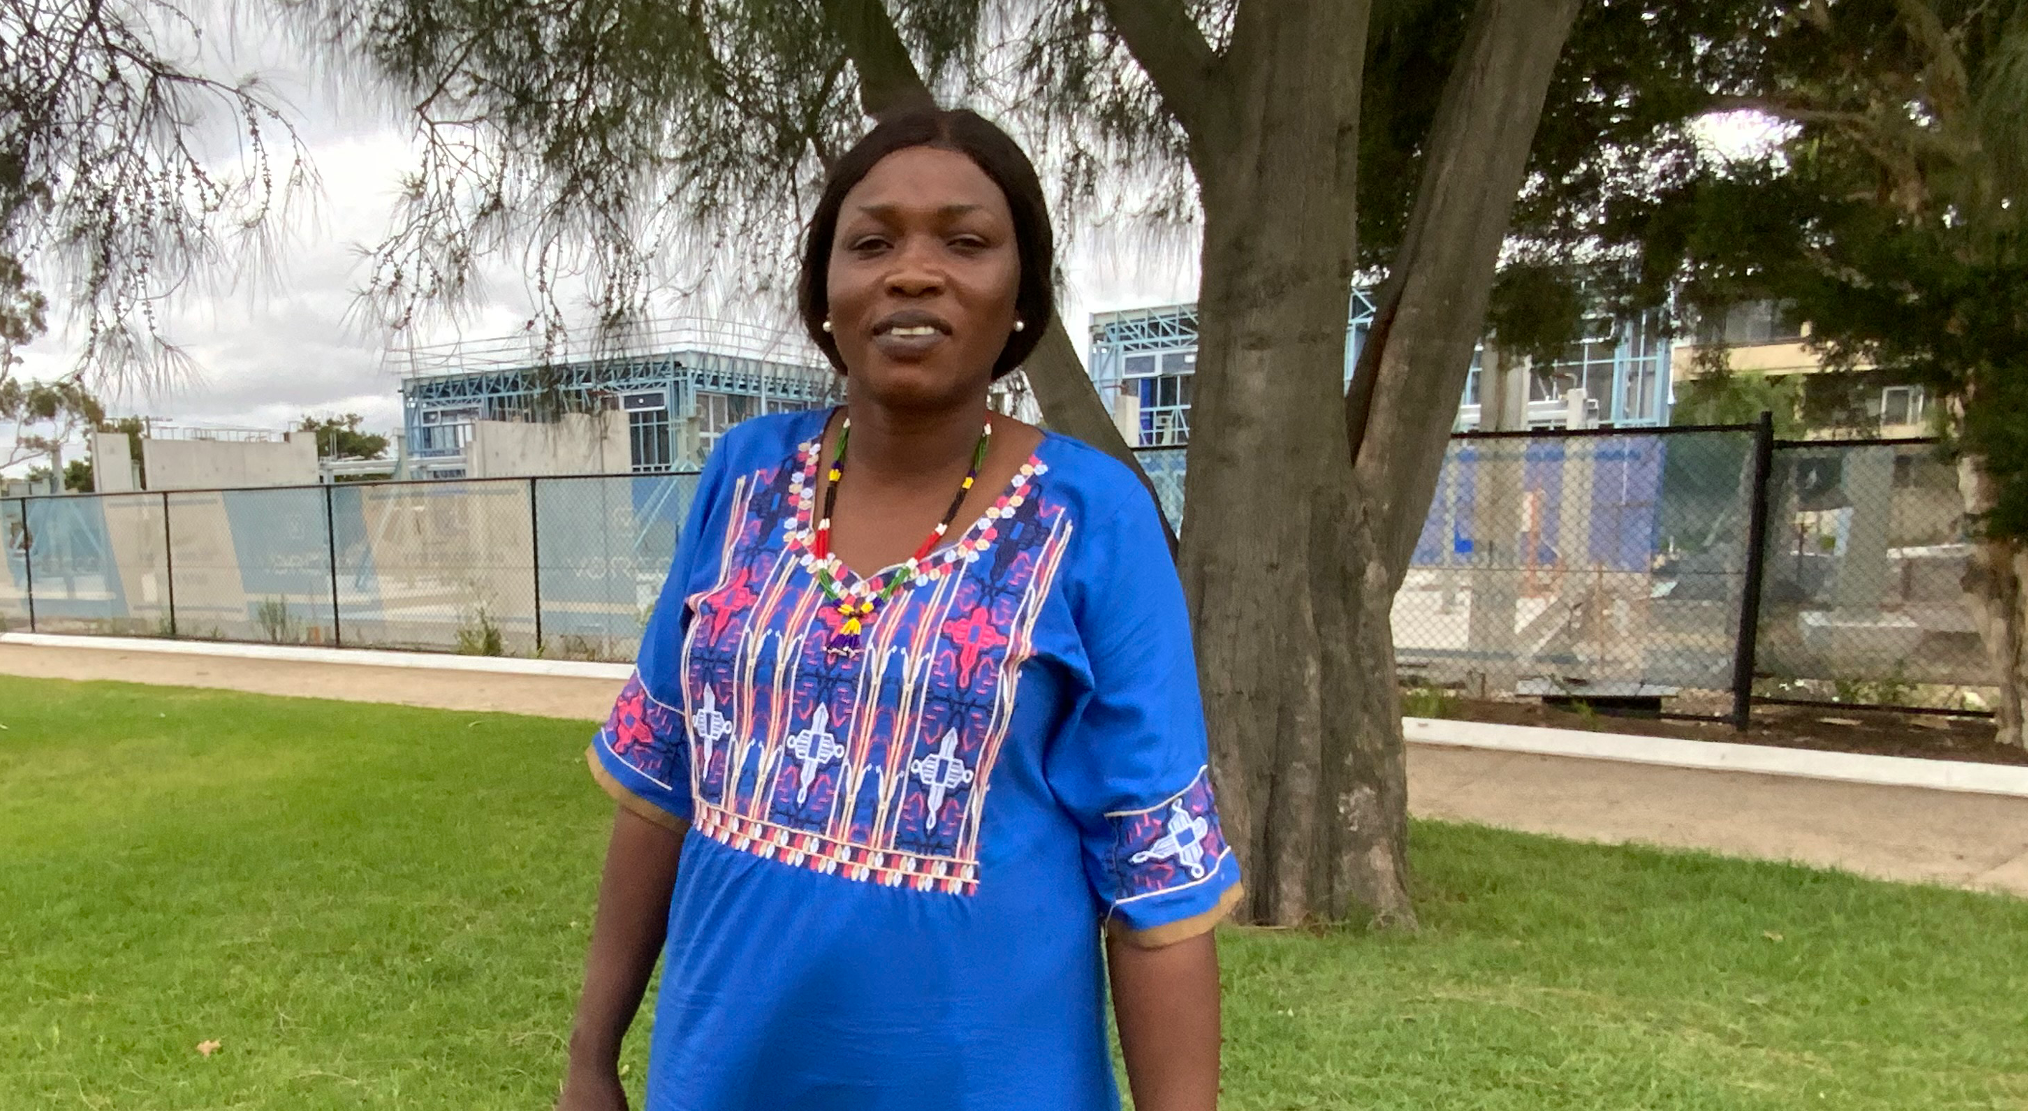 Achai Deng came to Australia in June of 2004 with her young children